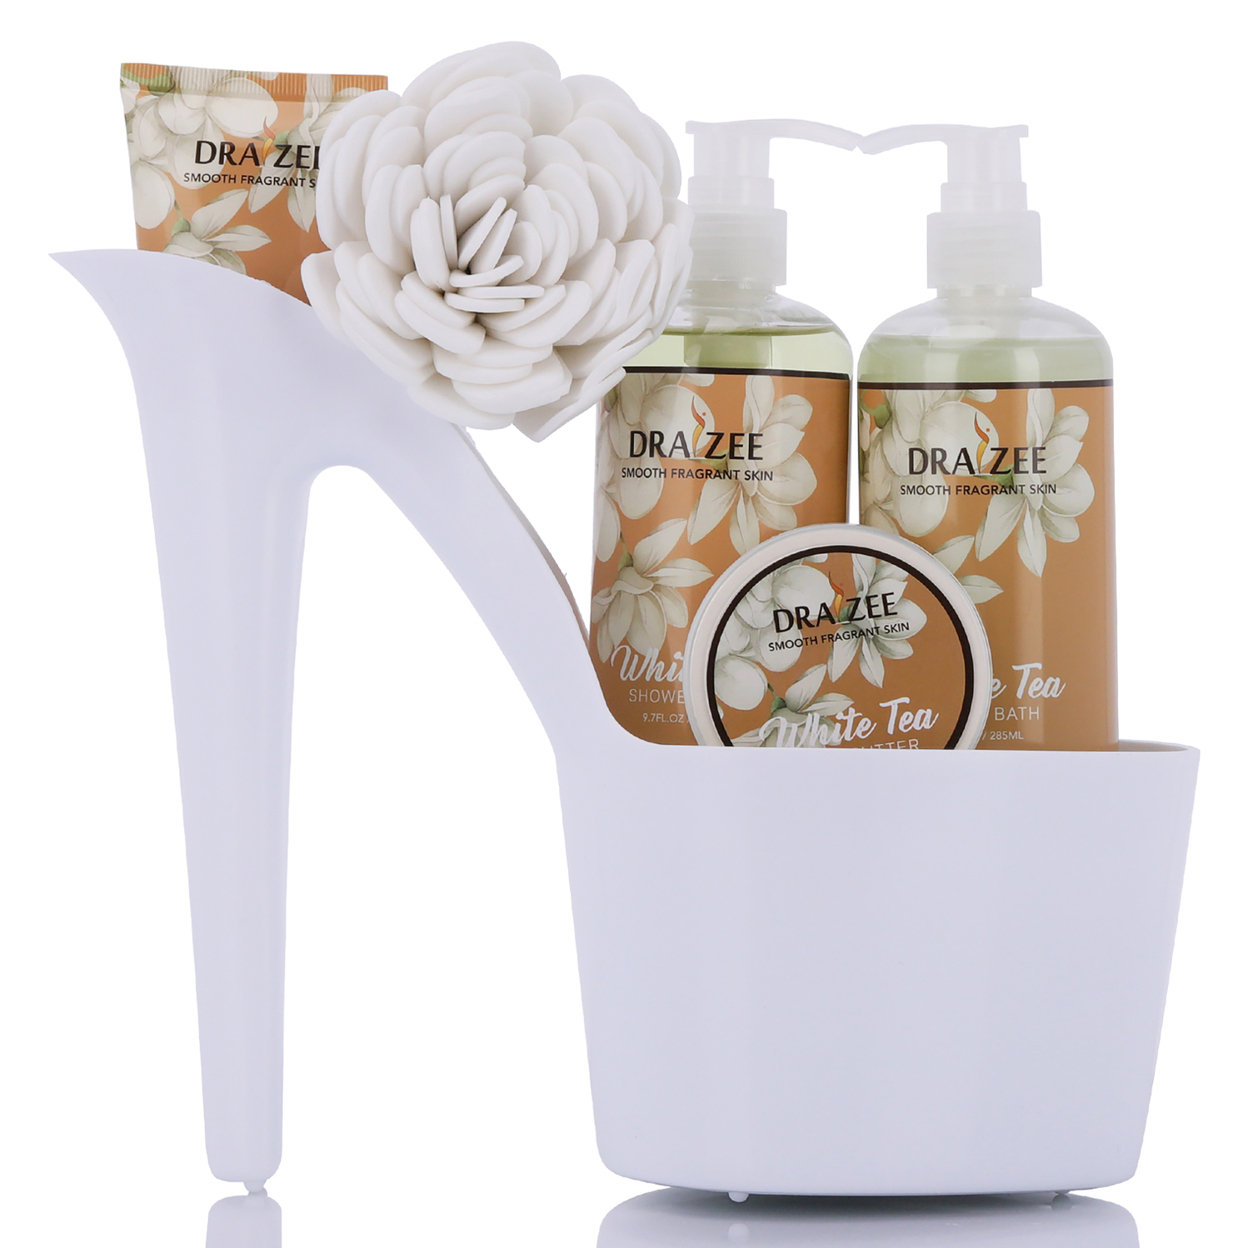 Draizee Heel Shoe Spa Gift Set White Tea Scented Bath Essentials Gift Basket With Shower Gel, Bubble Bath, Body Butter, Body Lotion